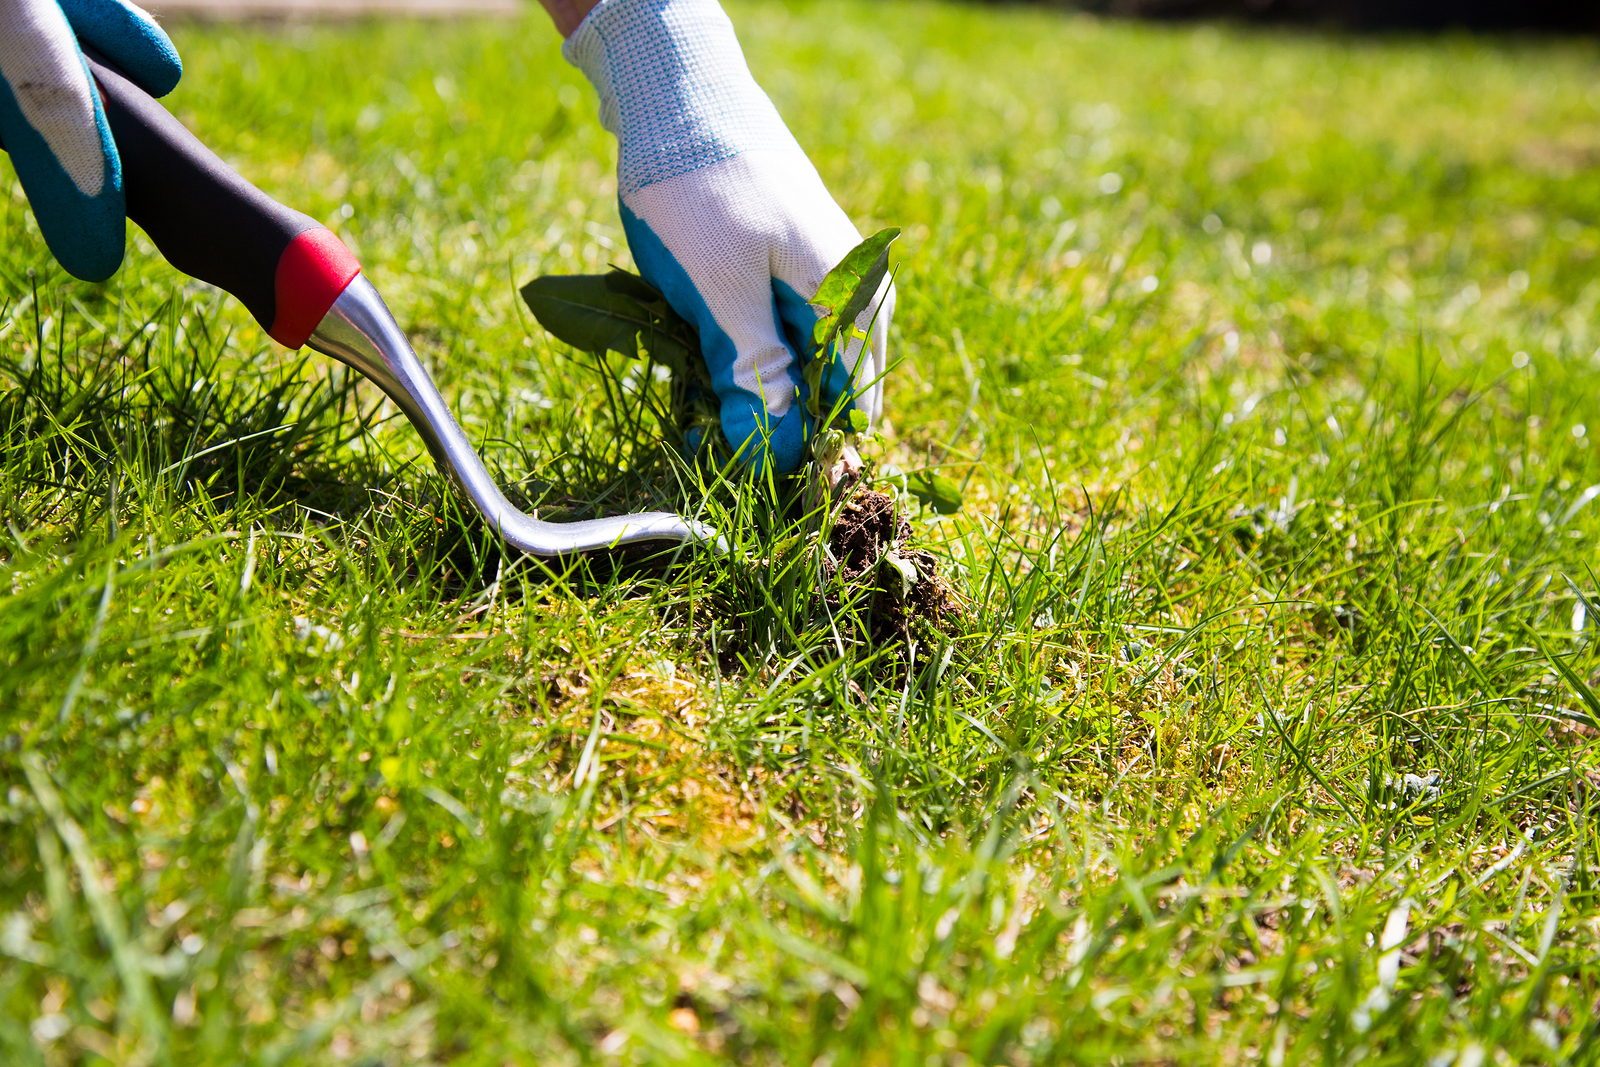 Fall Yard Care Tips: Take Care of Your Lawn